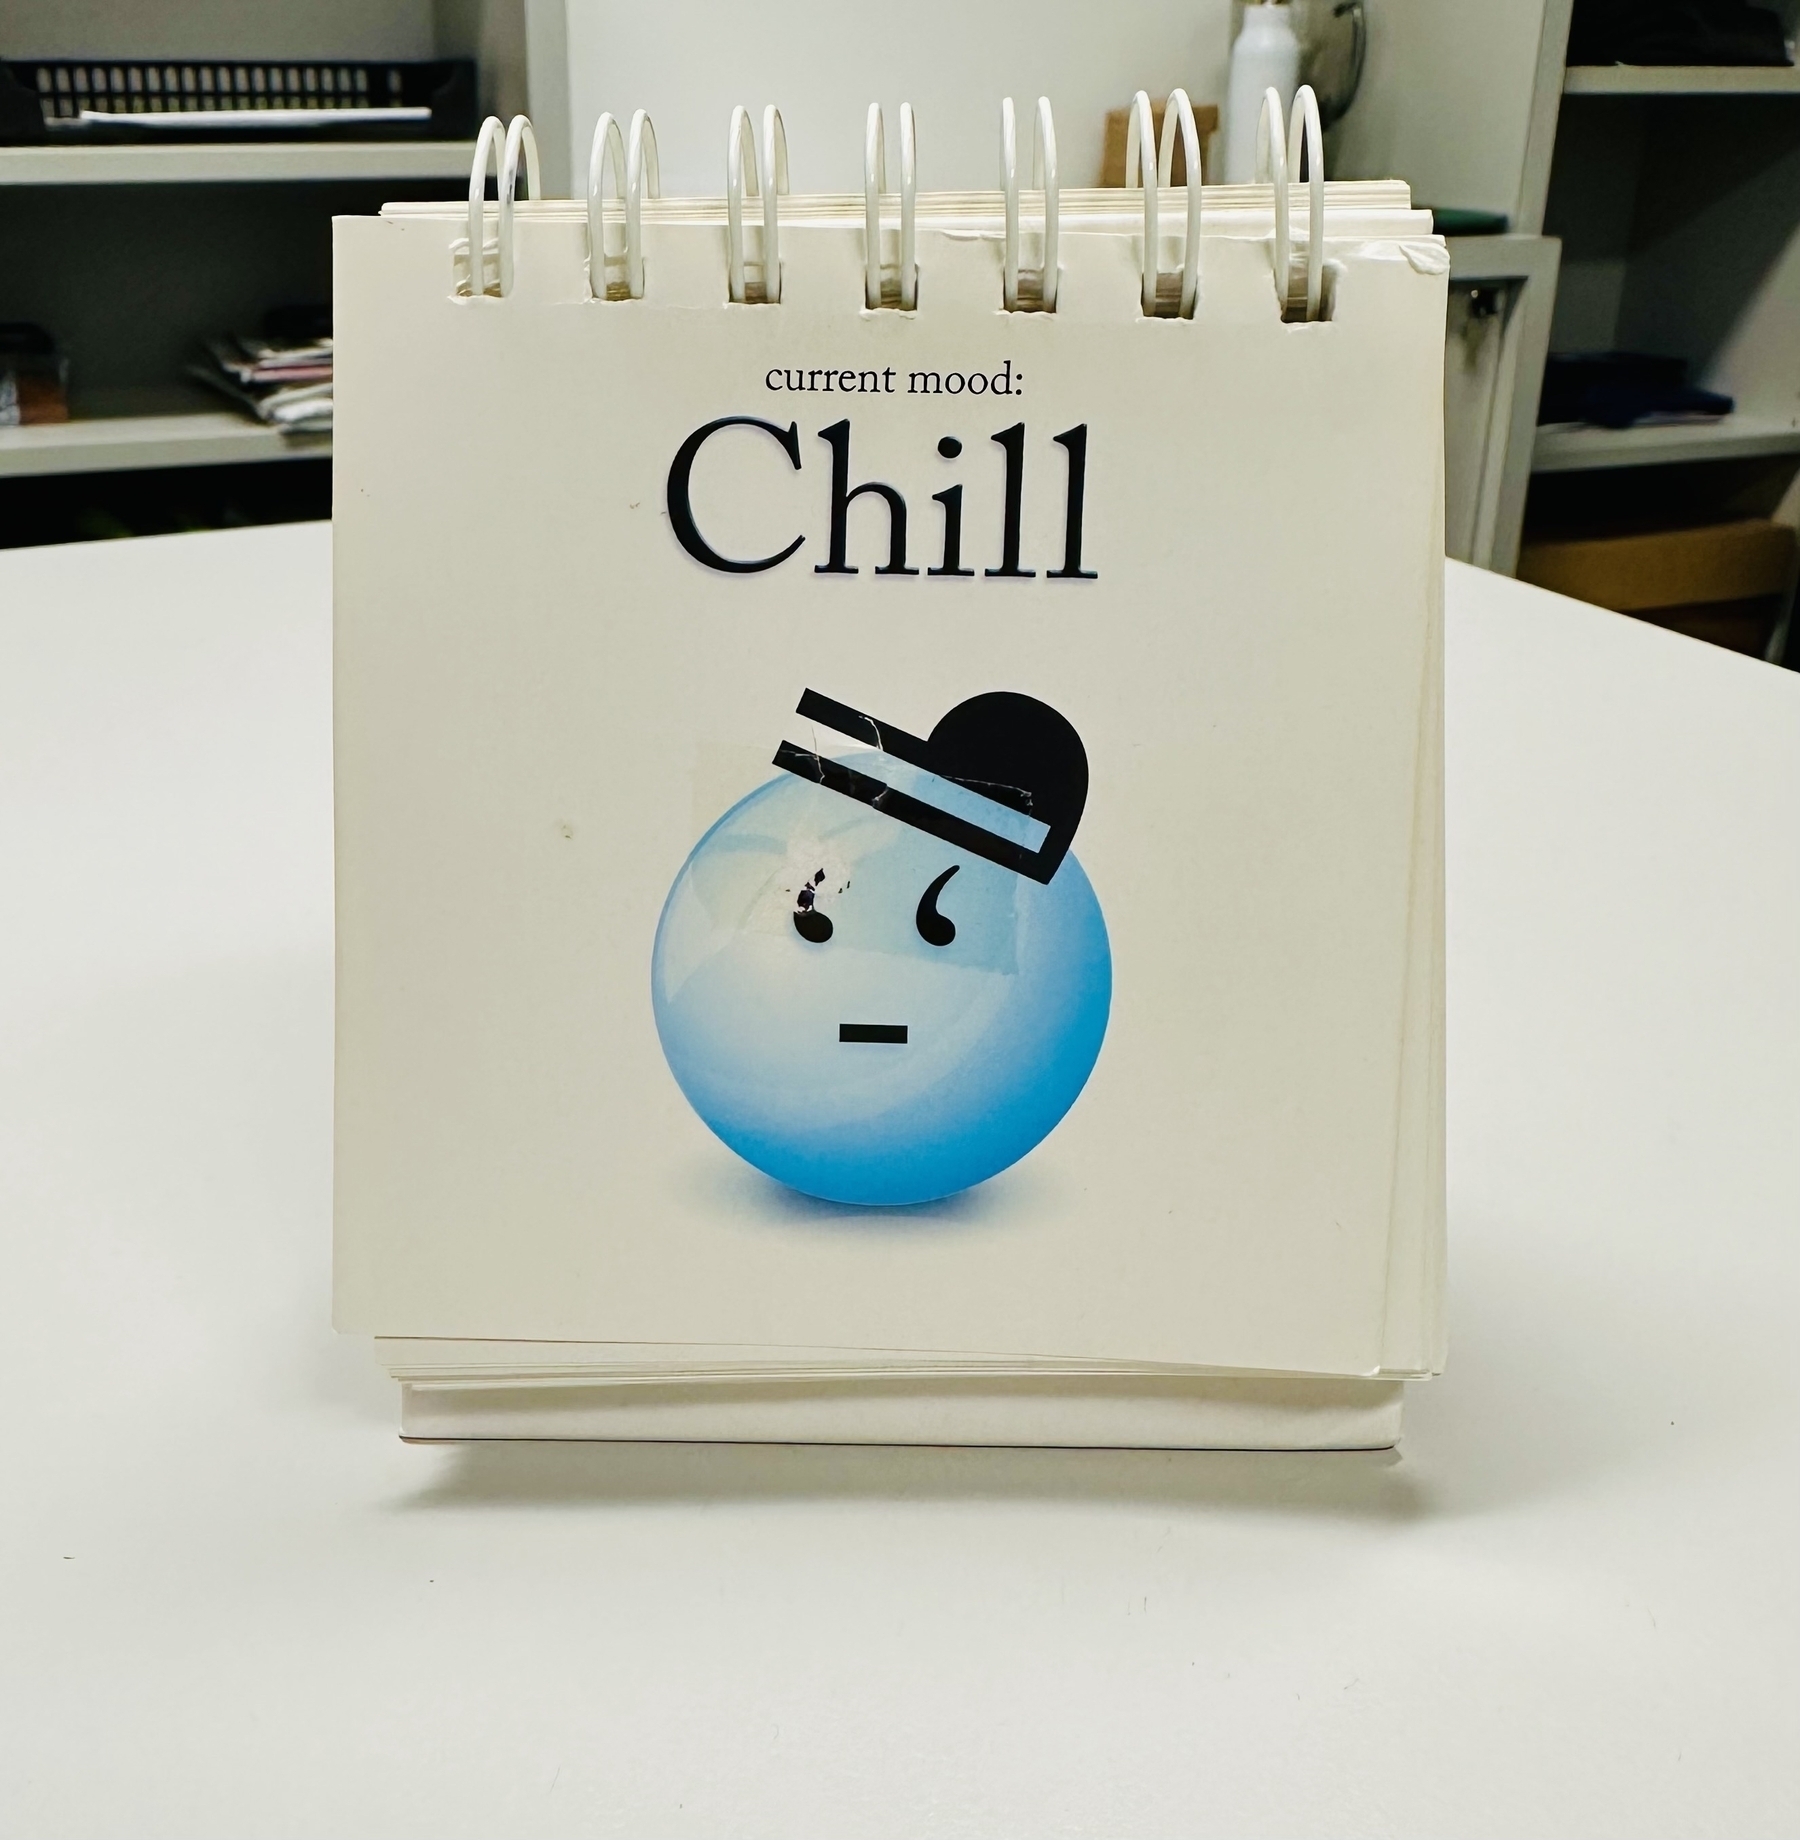 A square sign sitting on a desk. The image says “Current mood:” and then in larger font underneath “Chill”. A blue whimsical emoji face is below that.